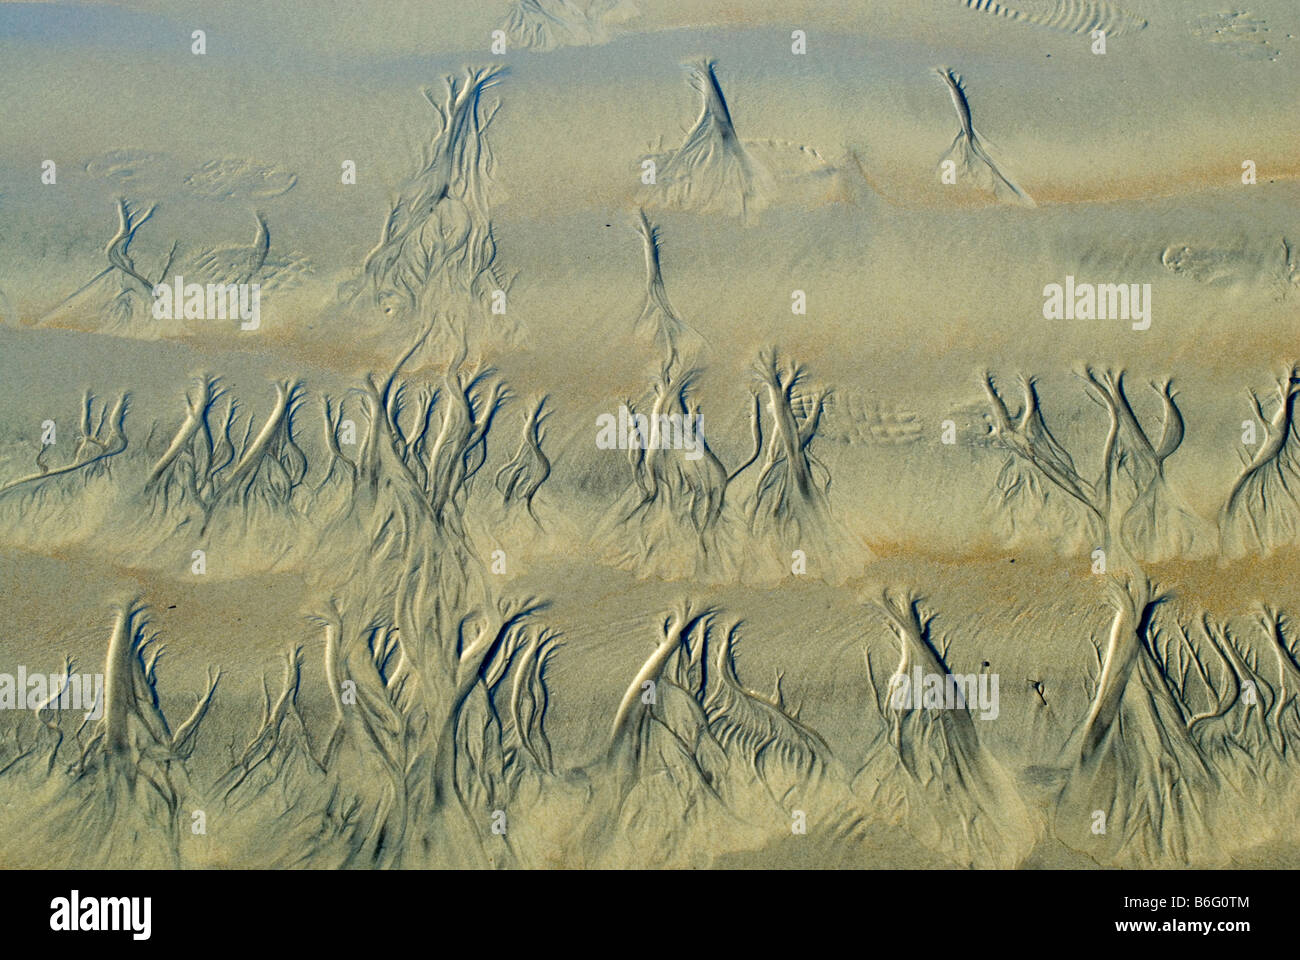 Tree-like marks made in sand by the retreating tide. Stock Photo